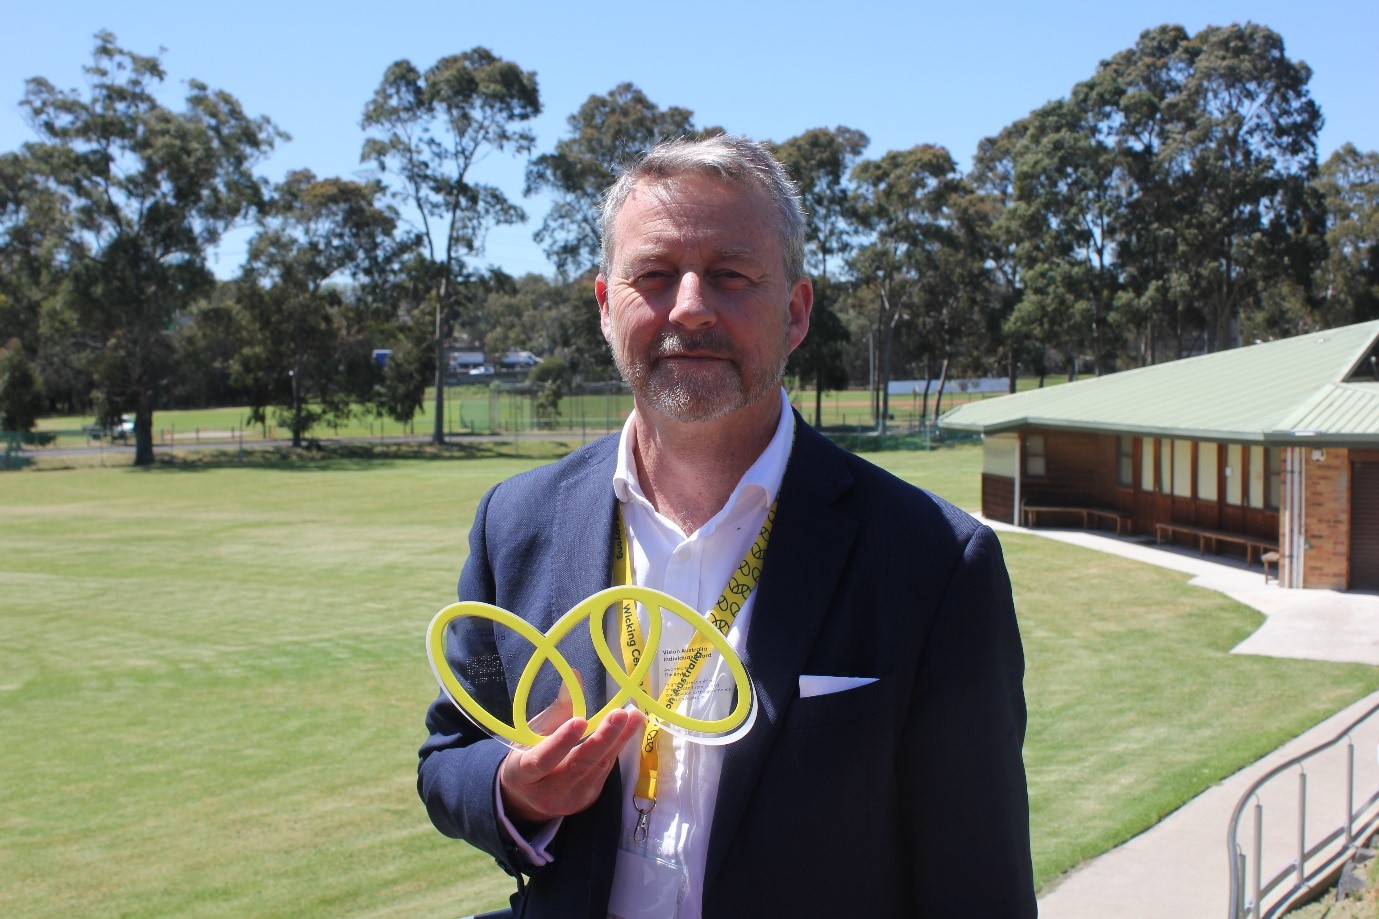 " VA Award winner Tim, holding his award which takes the shape of the VA logo of 3 yellow ovals linked together"